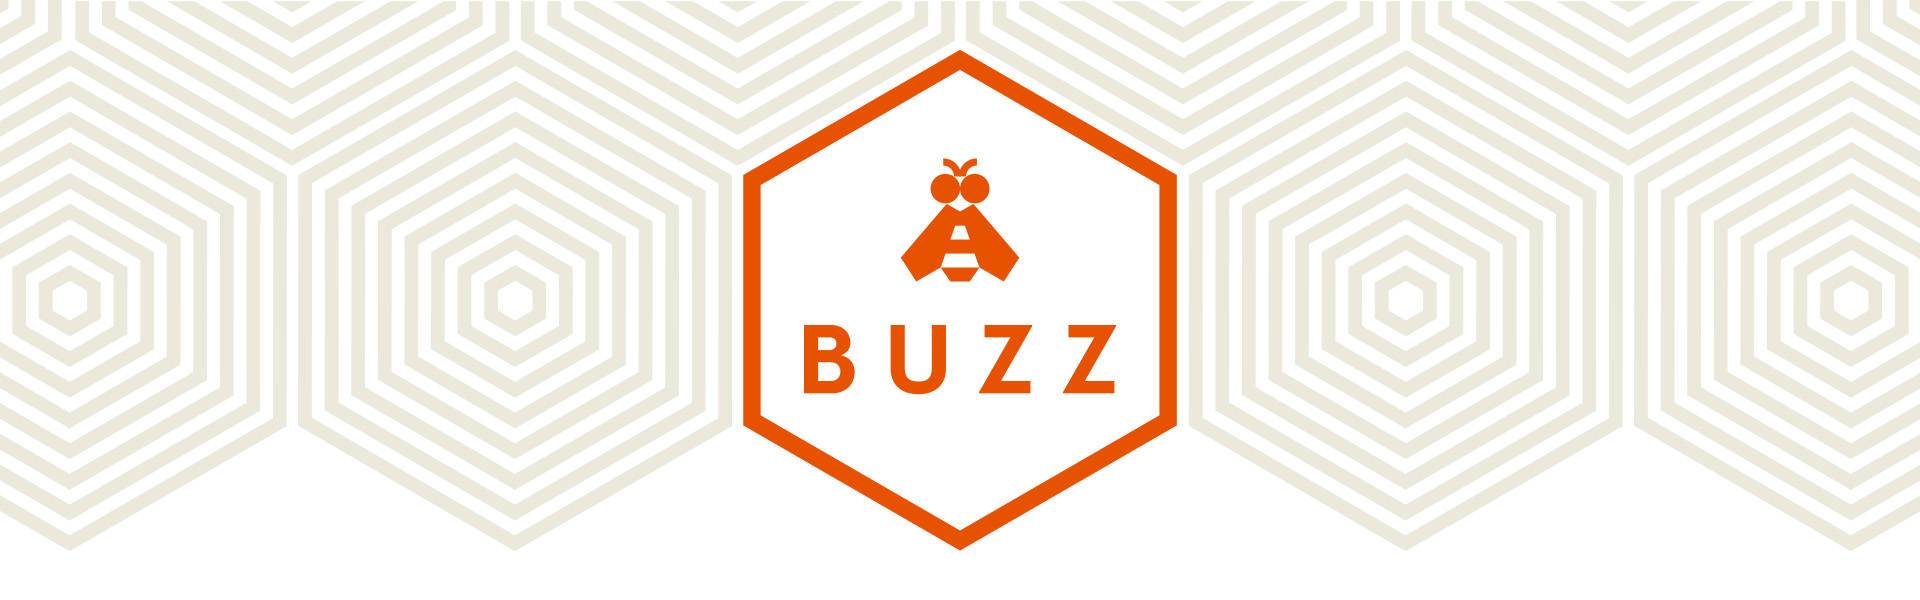 Buzz Home Office Logo with honeycomb pattern